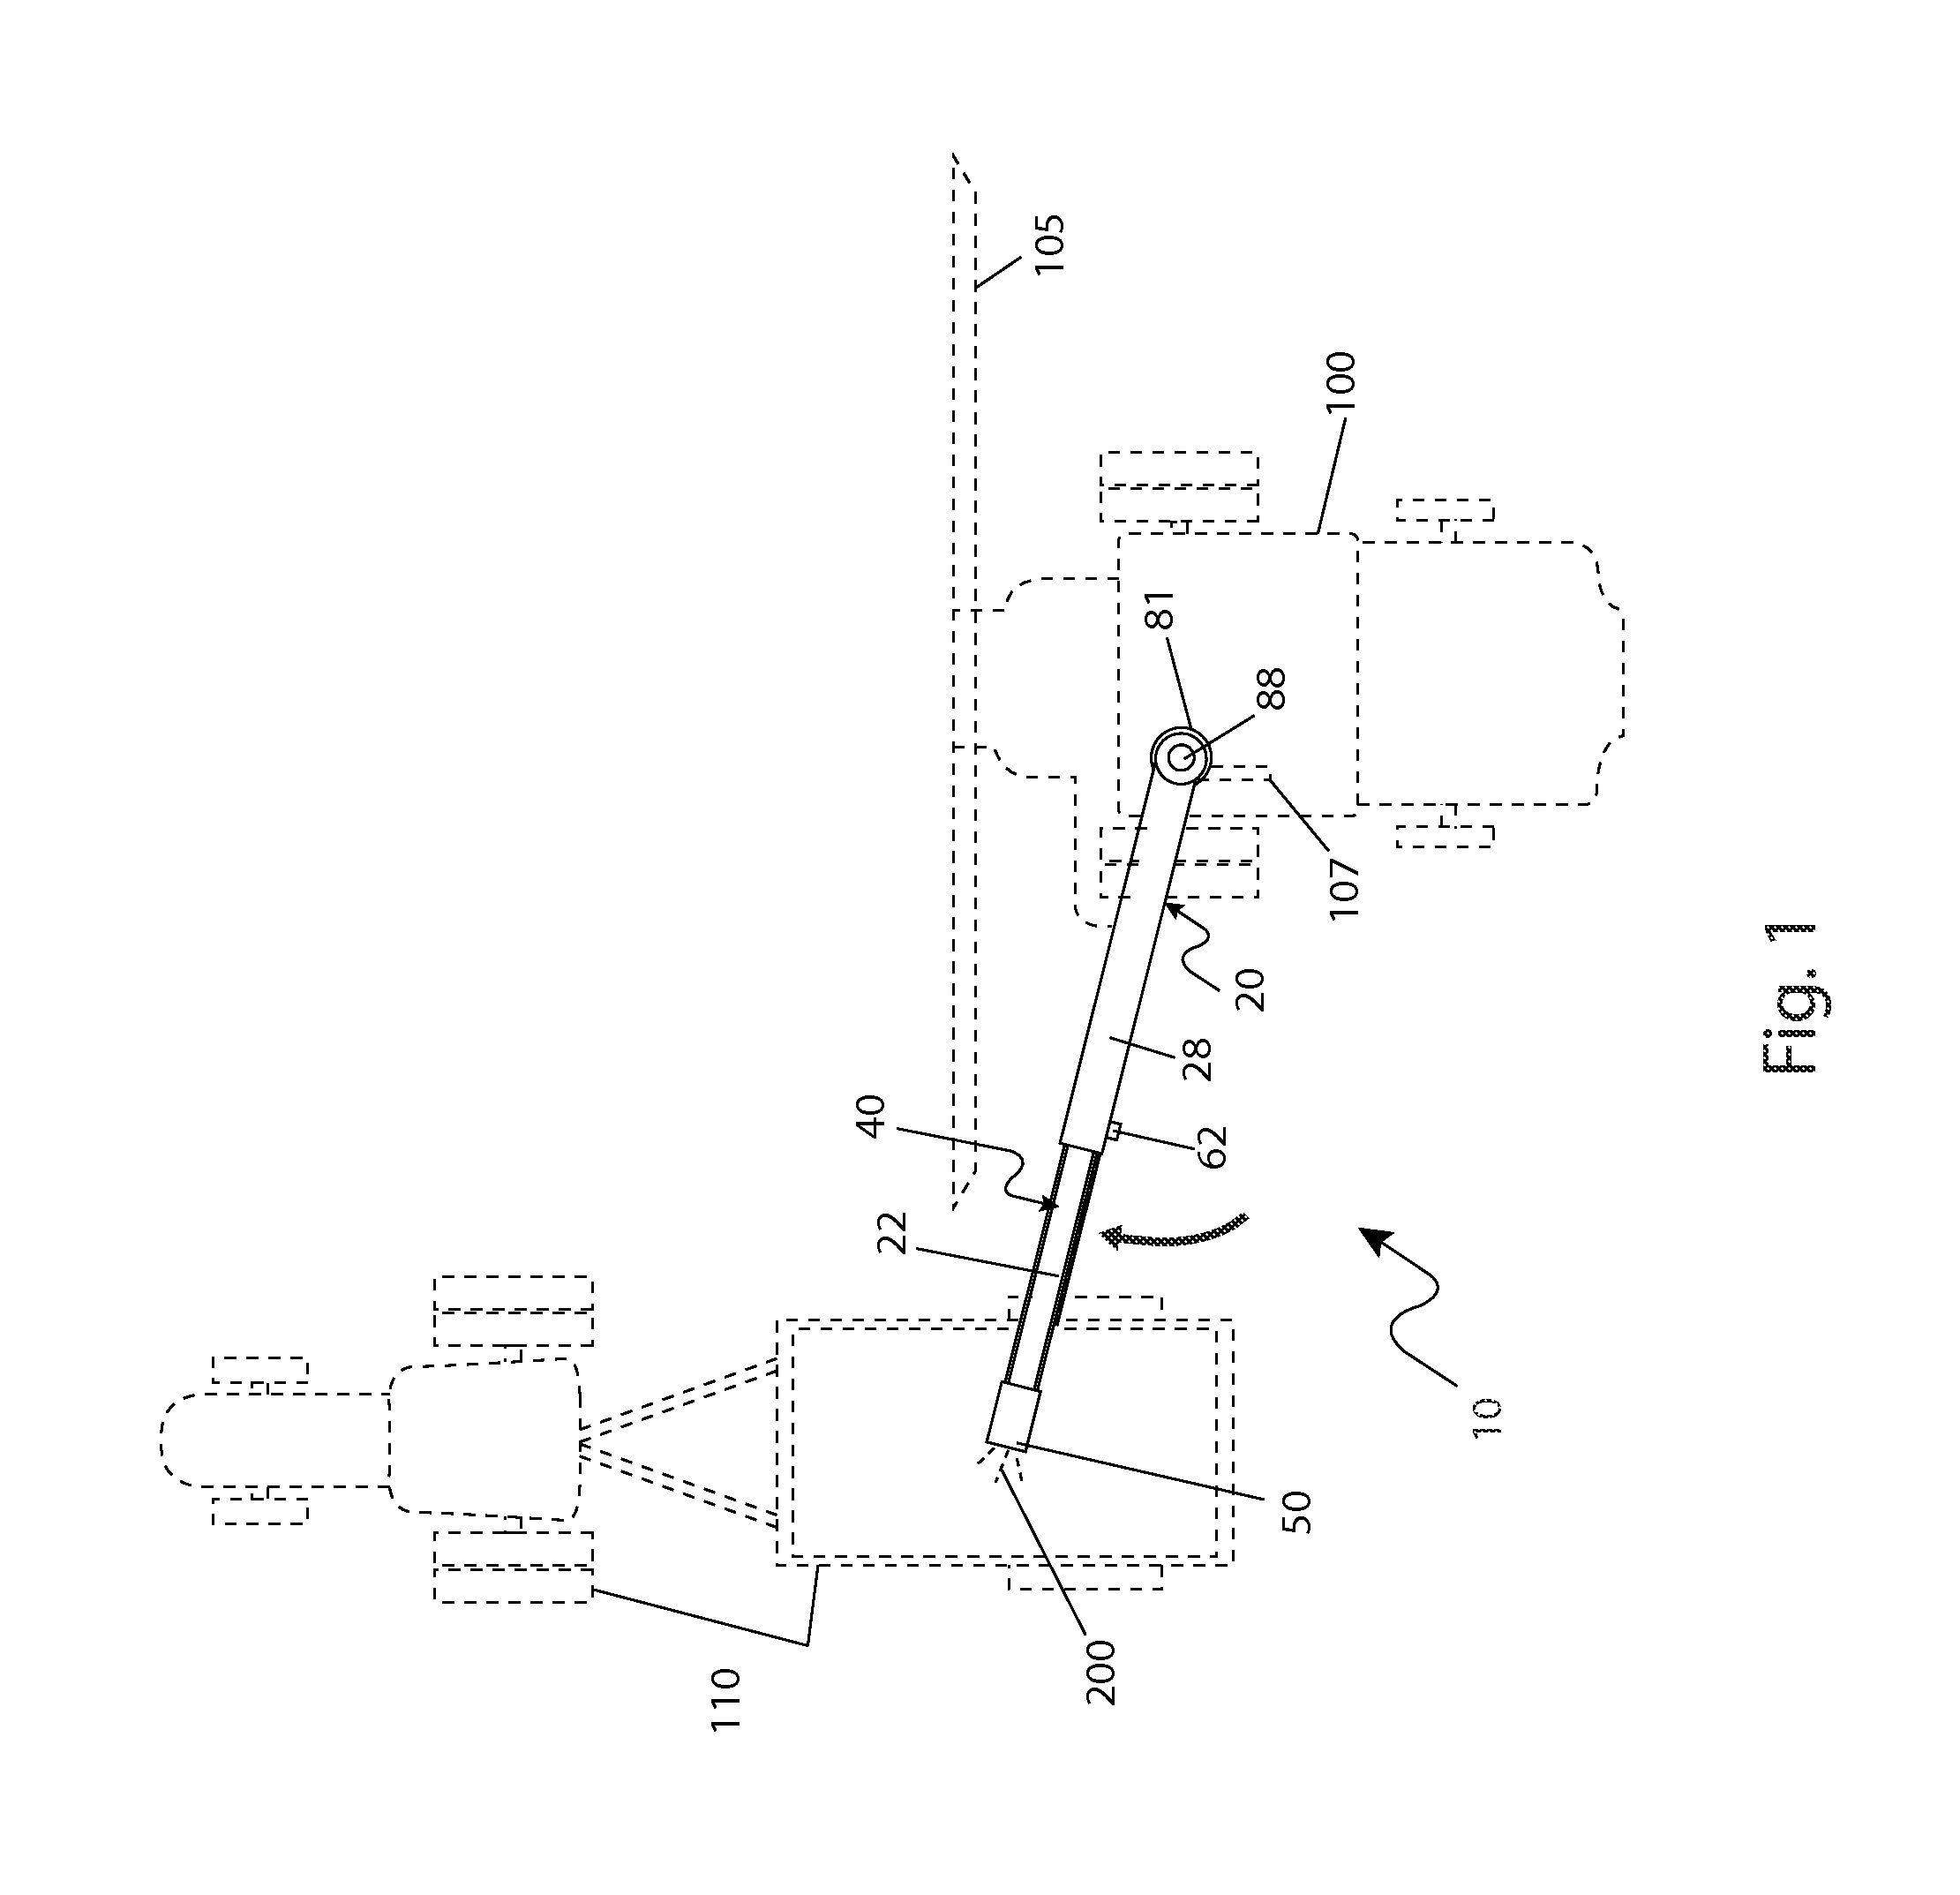 Adjustable conveyor assembly for a combine